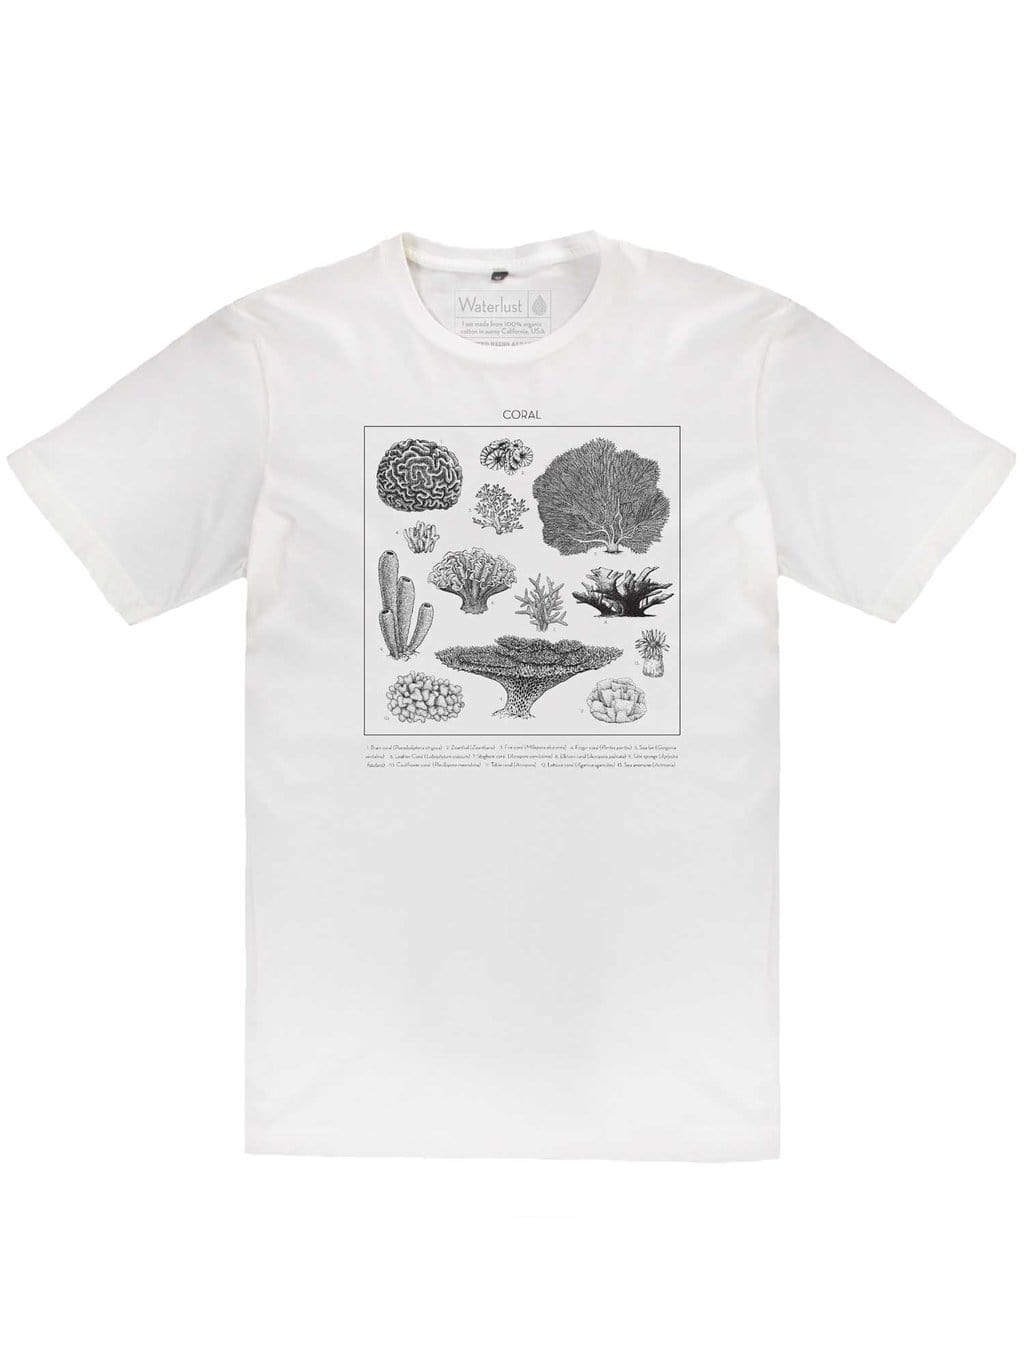 Flat, front view of the white tee with a coral identification graphic printed in black algae ink